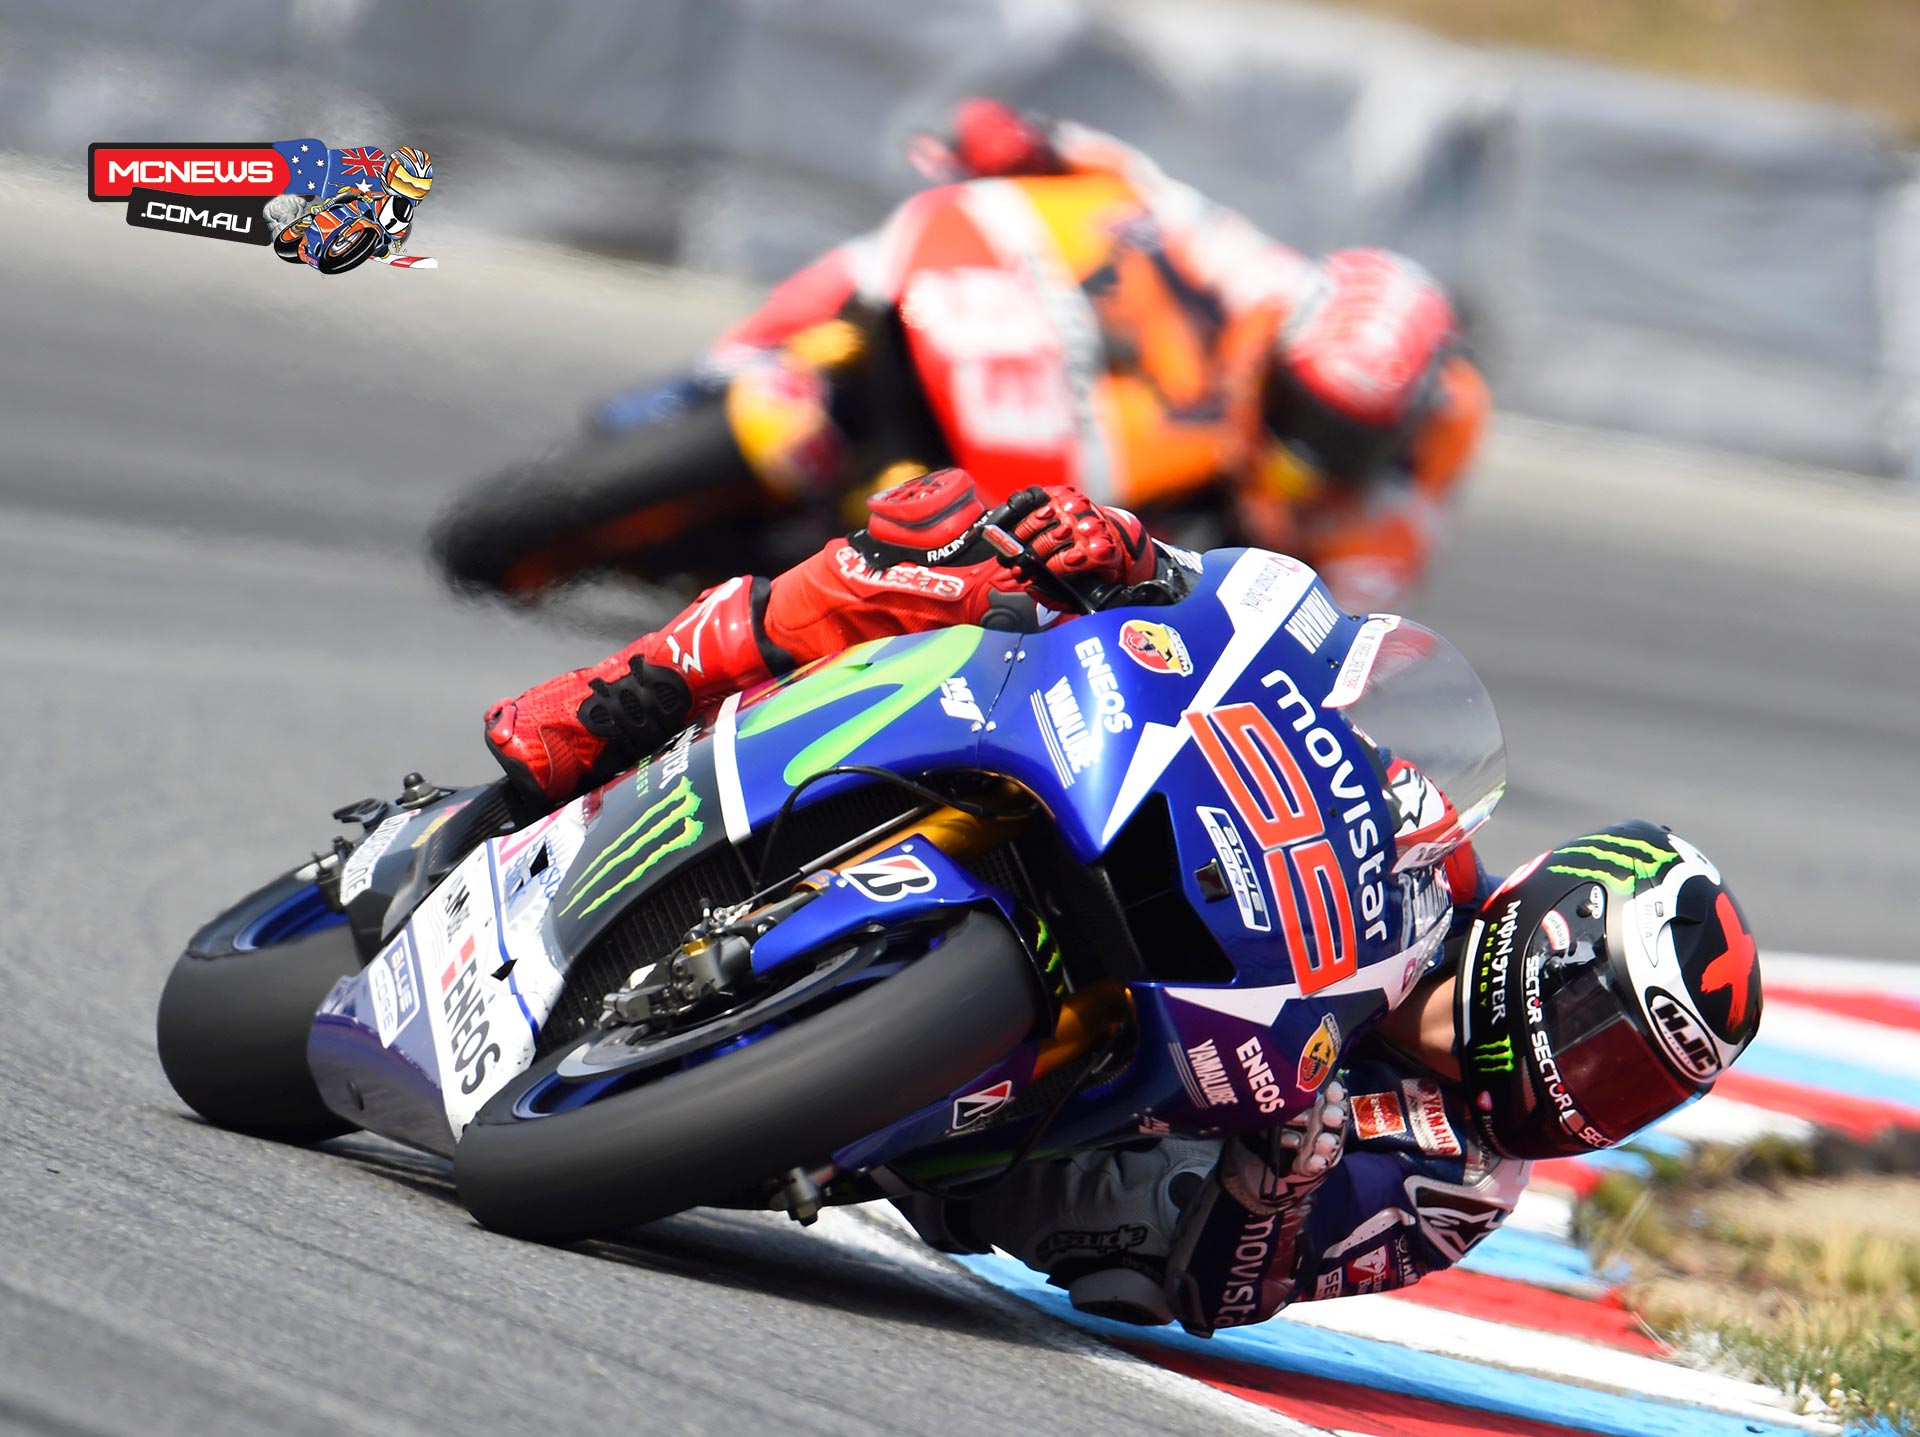 Brno Lorenzo Rossi Now Tied On Points Motorcycle News Sport And Reviews